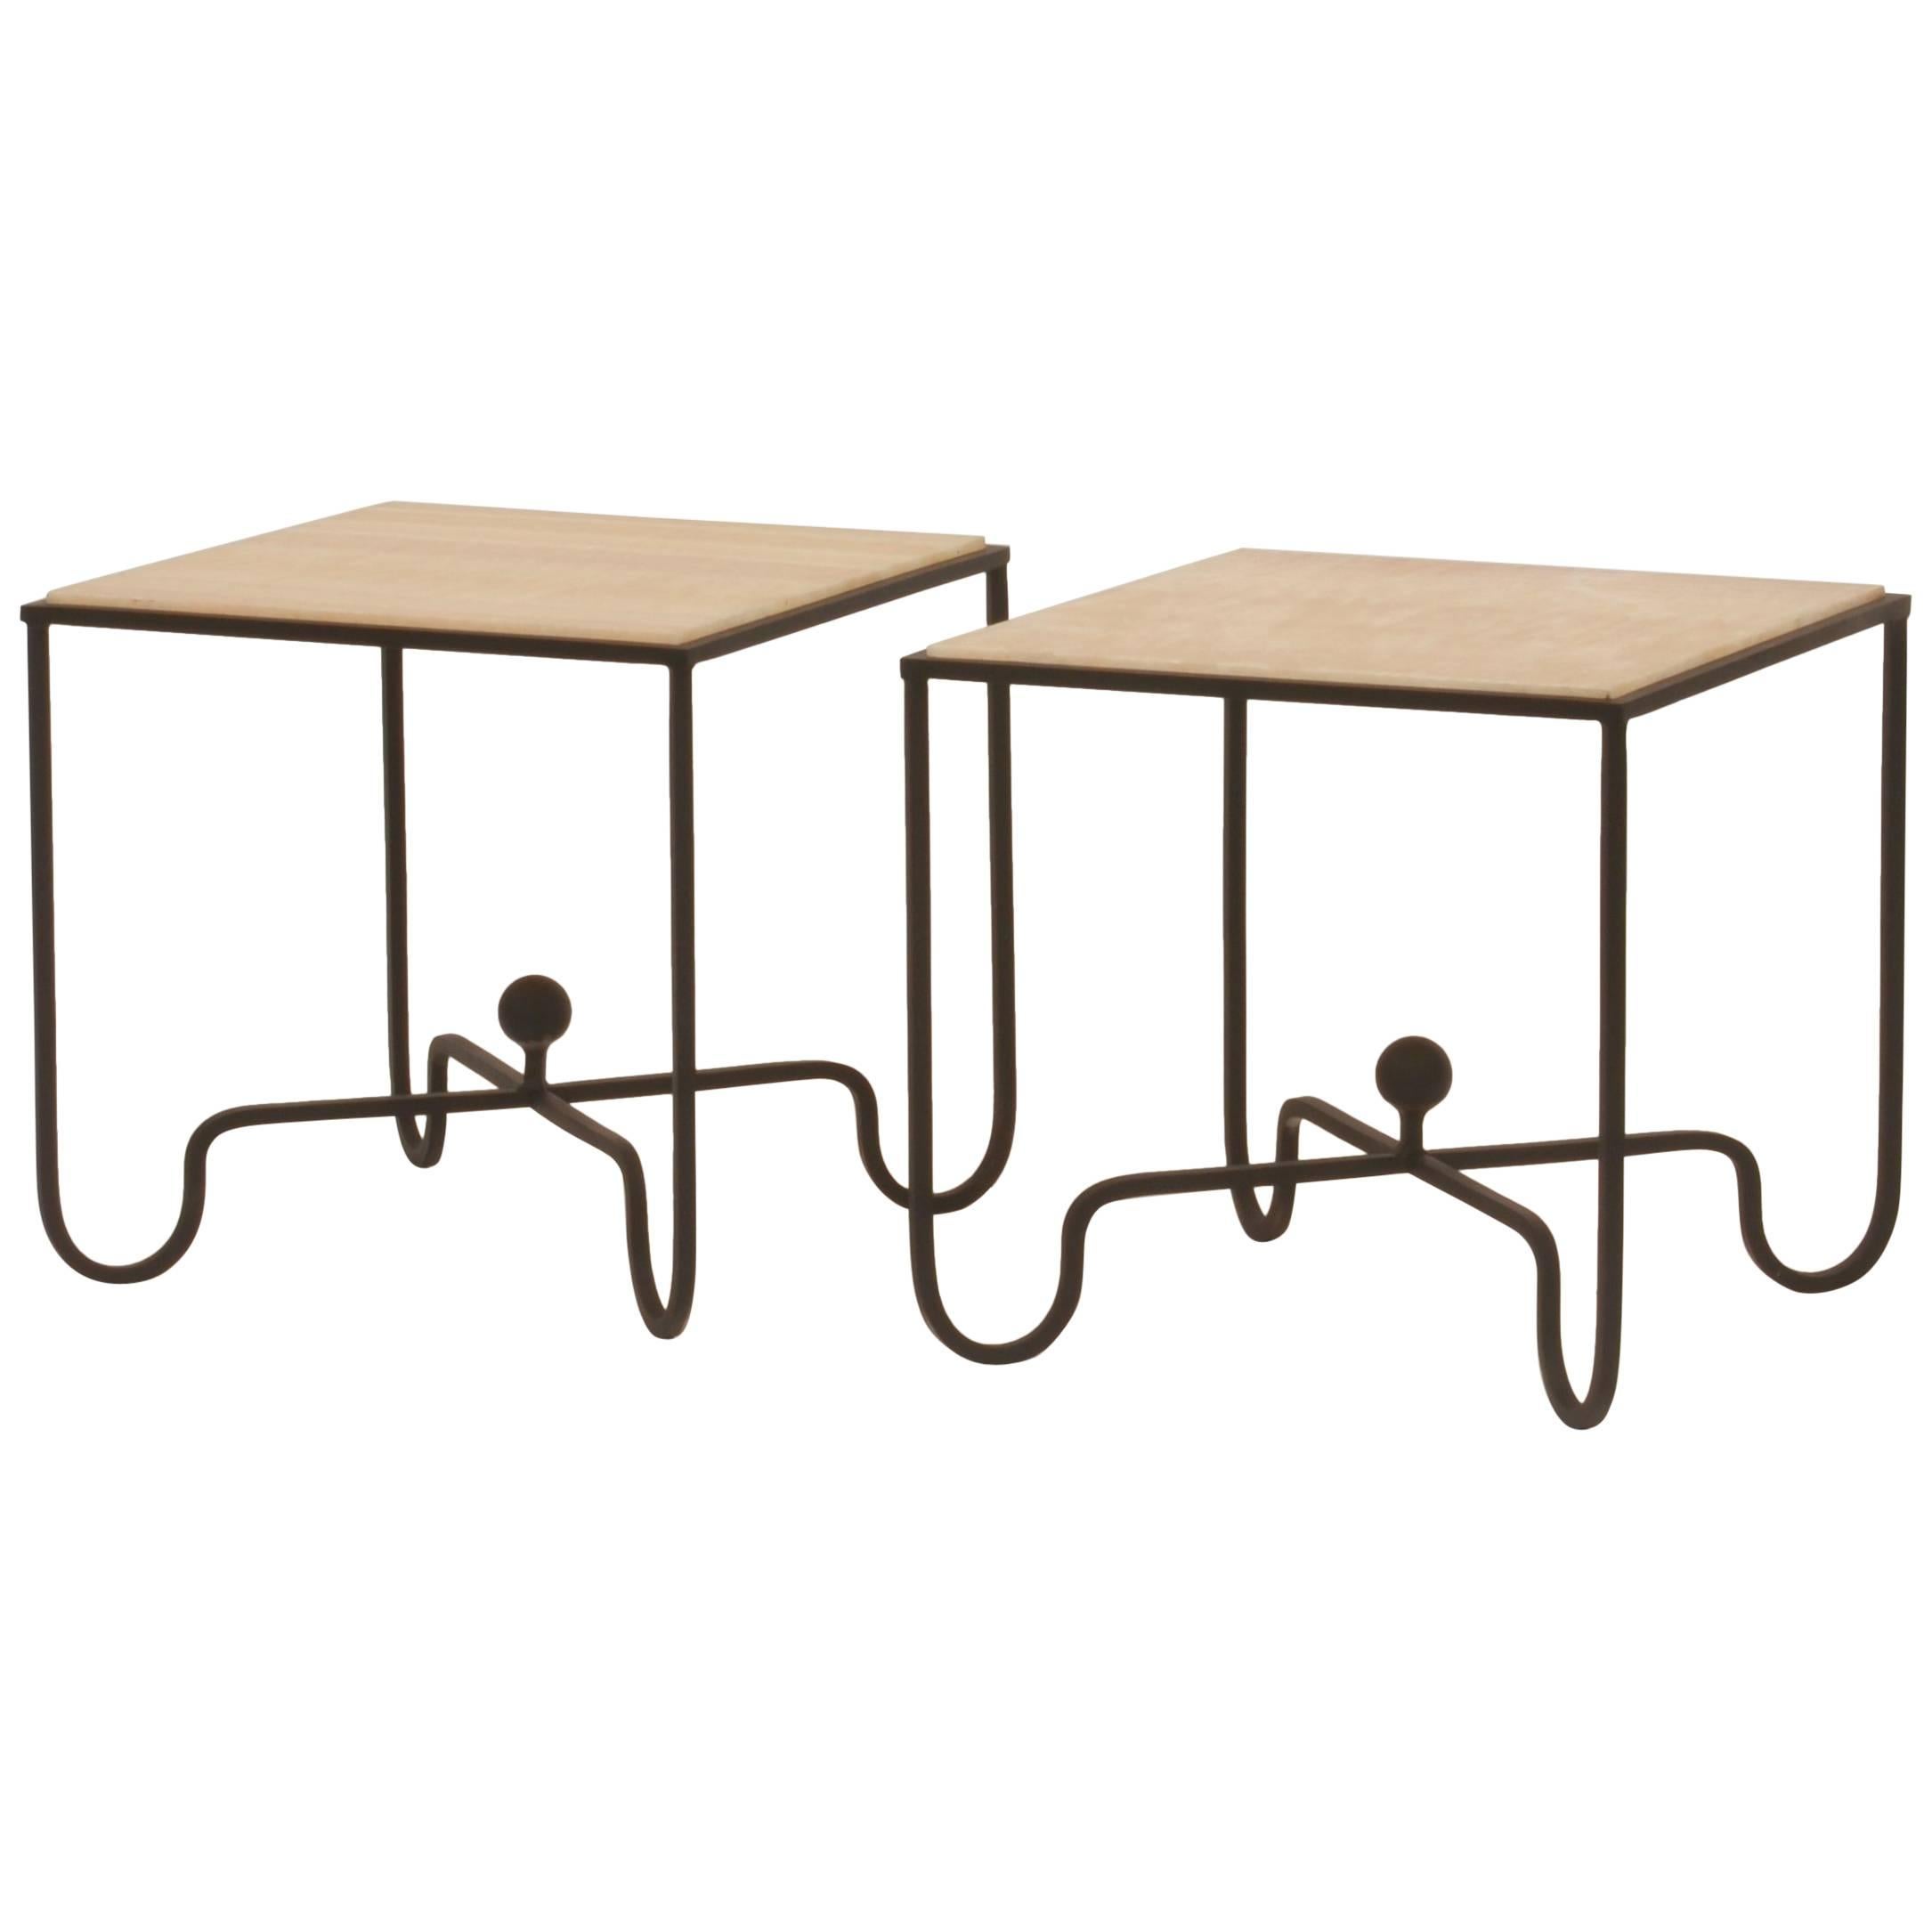 Pair of 'Entretoise' Wrought Iron and Onyx Side Tables by Design Frères